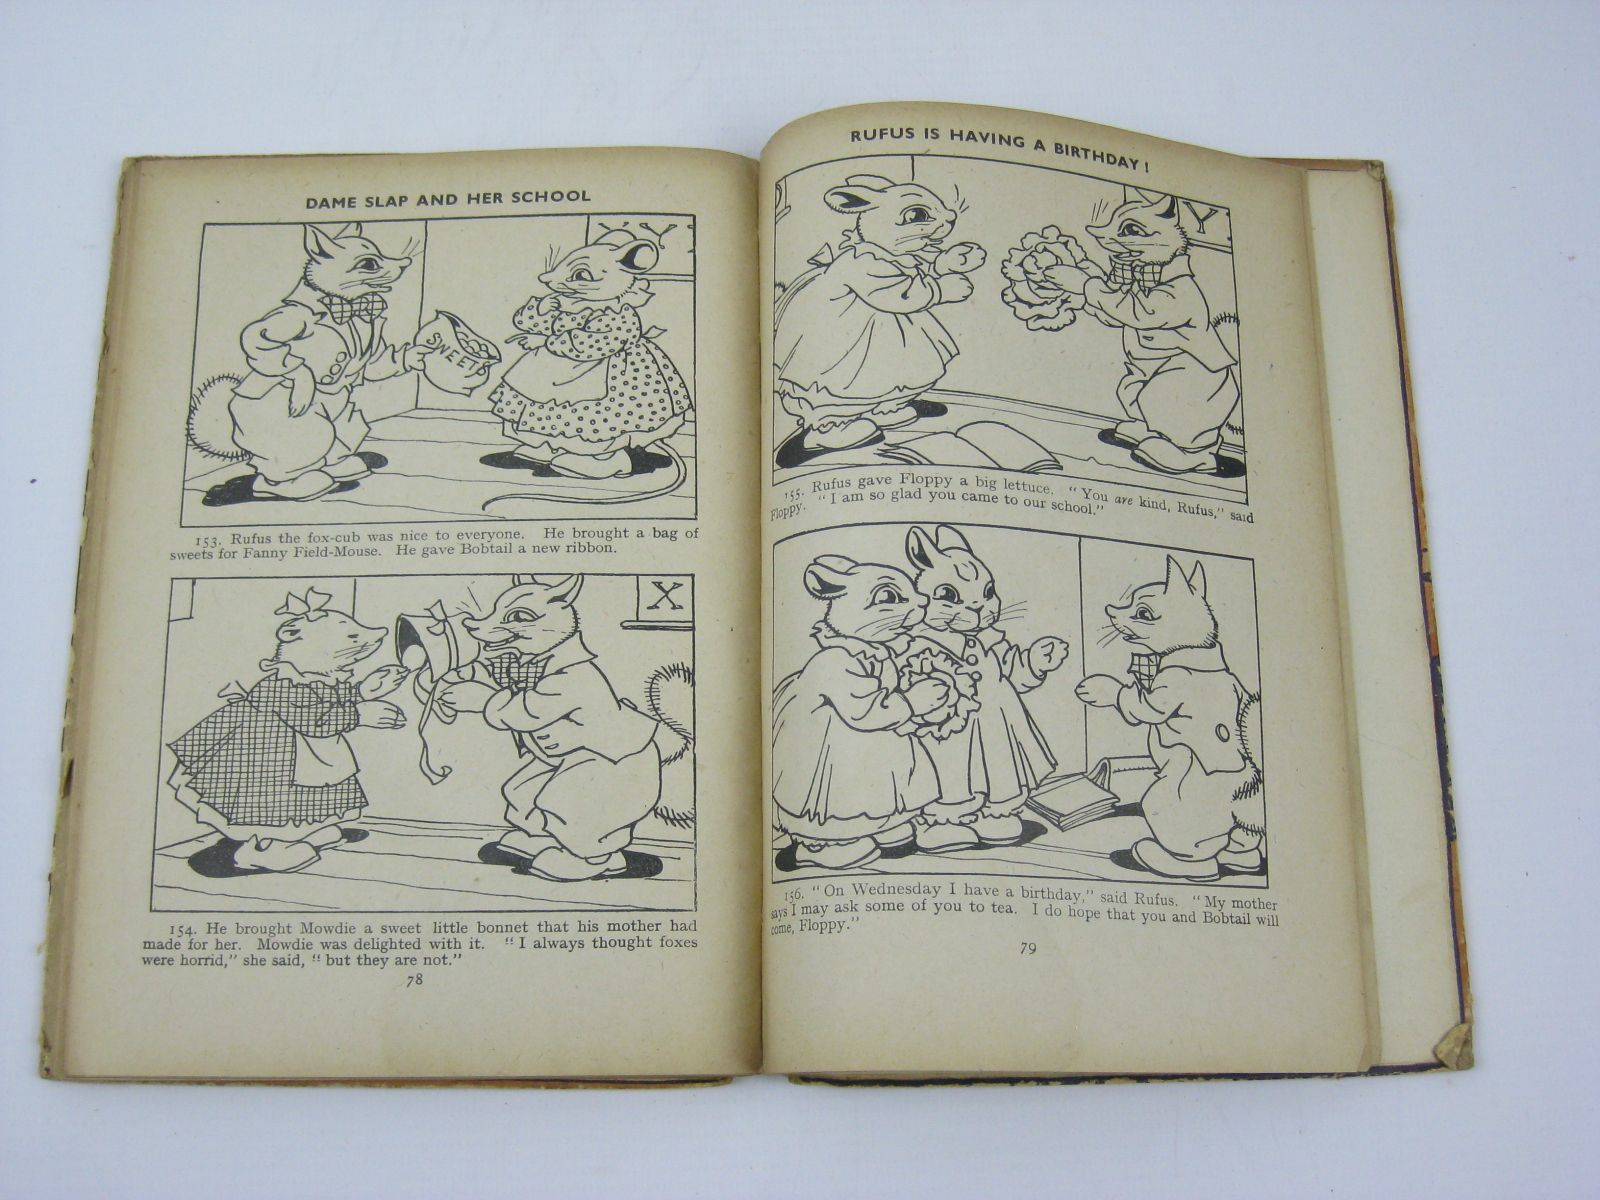 Photo of DAME SLAP AND HER SCHOOL written by Blyton, Enid illustrated by Wheeler, Dorothy published by George Newnes Limited (STOCK CODE: 1406285)  for sale by Stella & Rose's Books